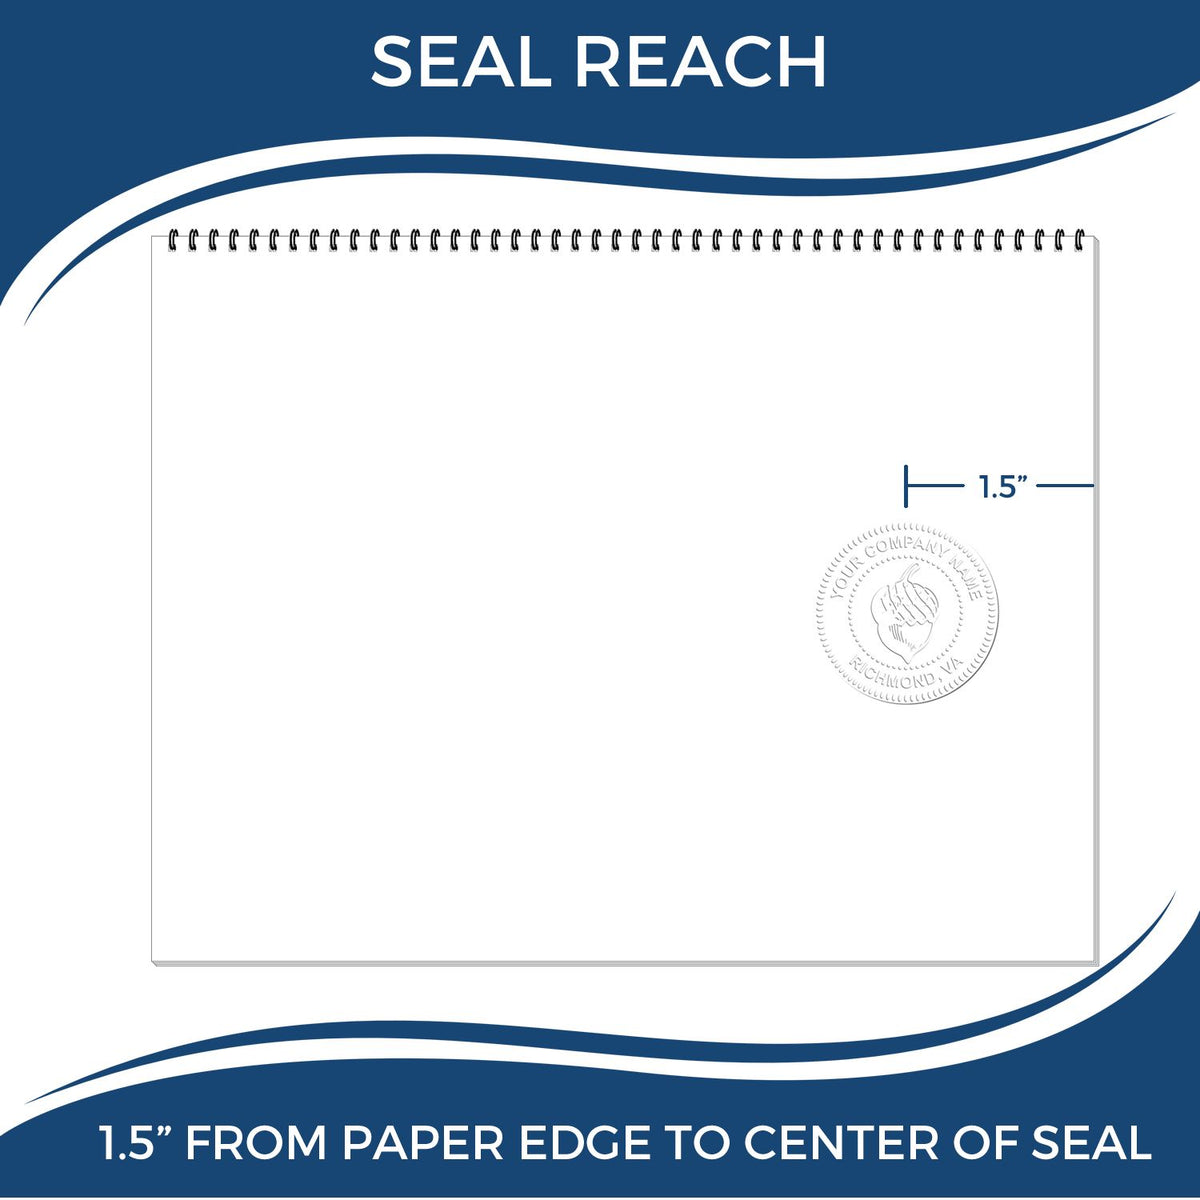 An infographic showing the seal reach which is represented by a ruler and a miniature seal image of the Hybrid Indiana Geologist Seal